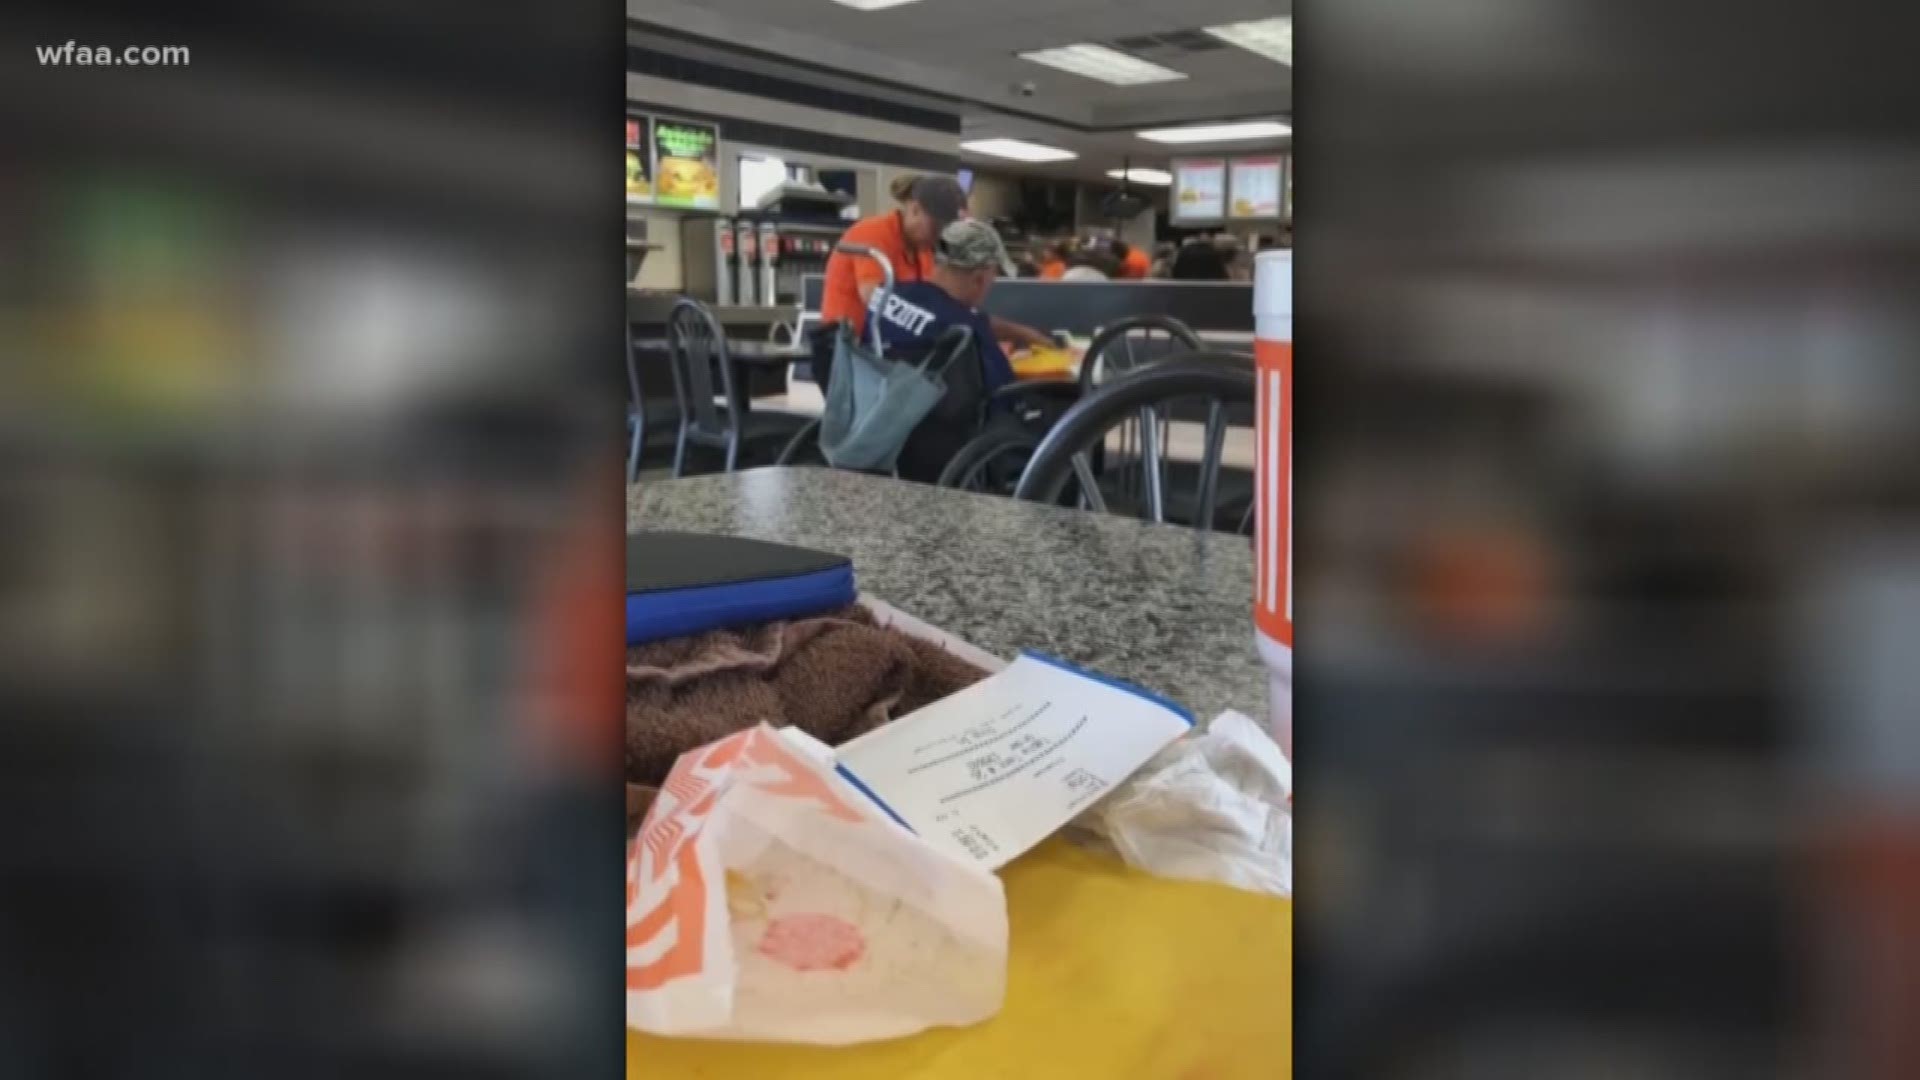 Endearing moment caught at Dallas Whataburger as employee cuts man's food